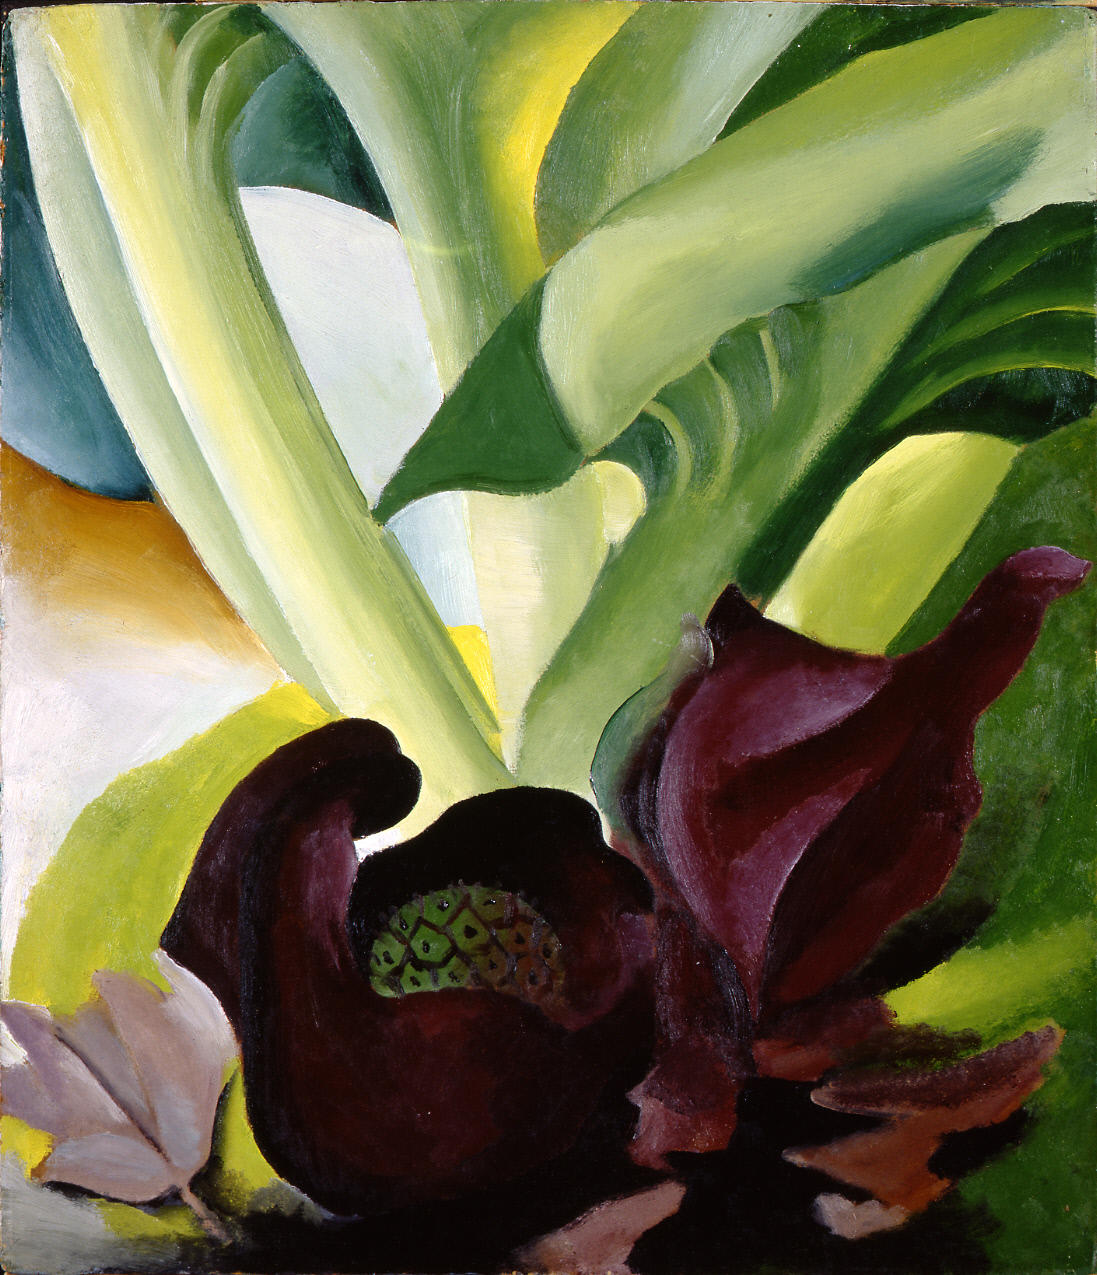 "Skunk Cabbage" (1927) by Georgia O'Keeffe